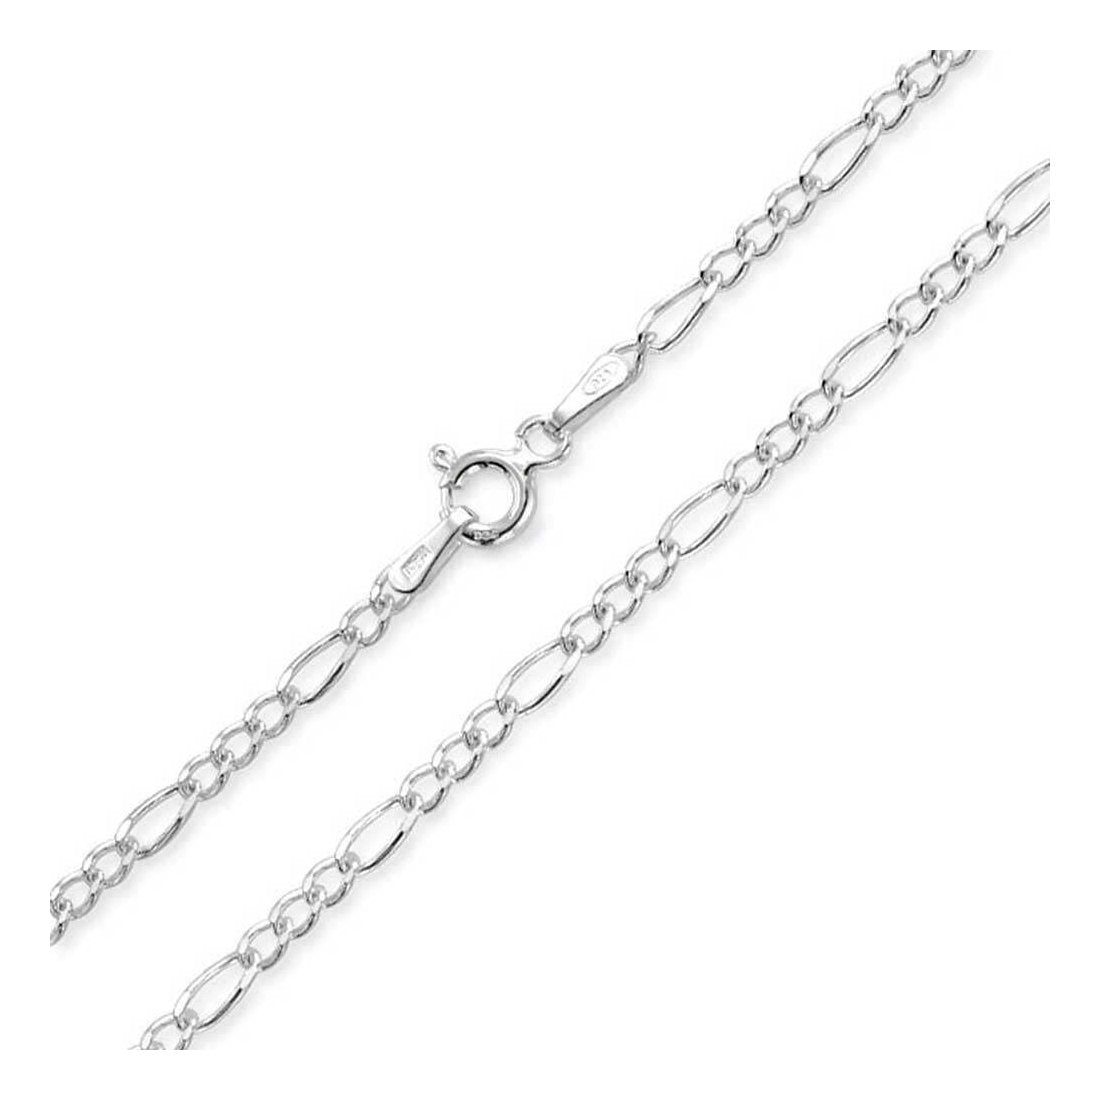 7.2MM 180 Figaro Link Chain .925 Solid Sterling Silver Sizes 8"-36" Inches